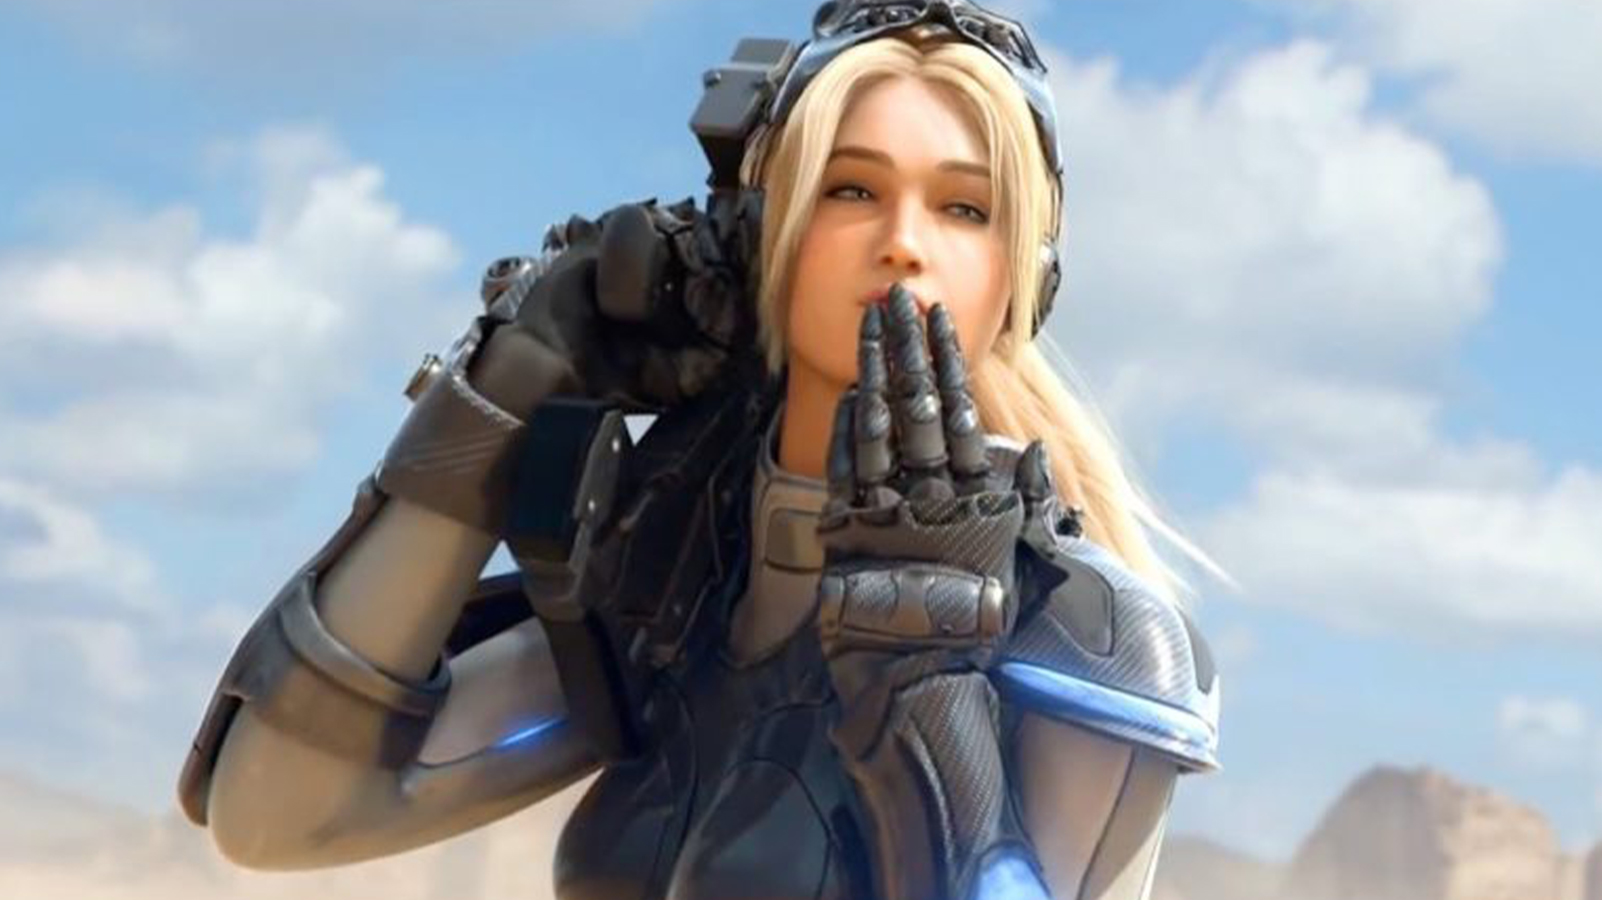 StarCraft could return, according to Blizzard president, but not